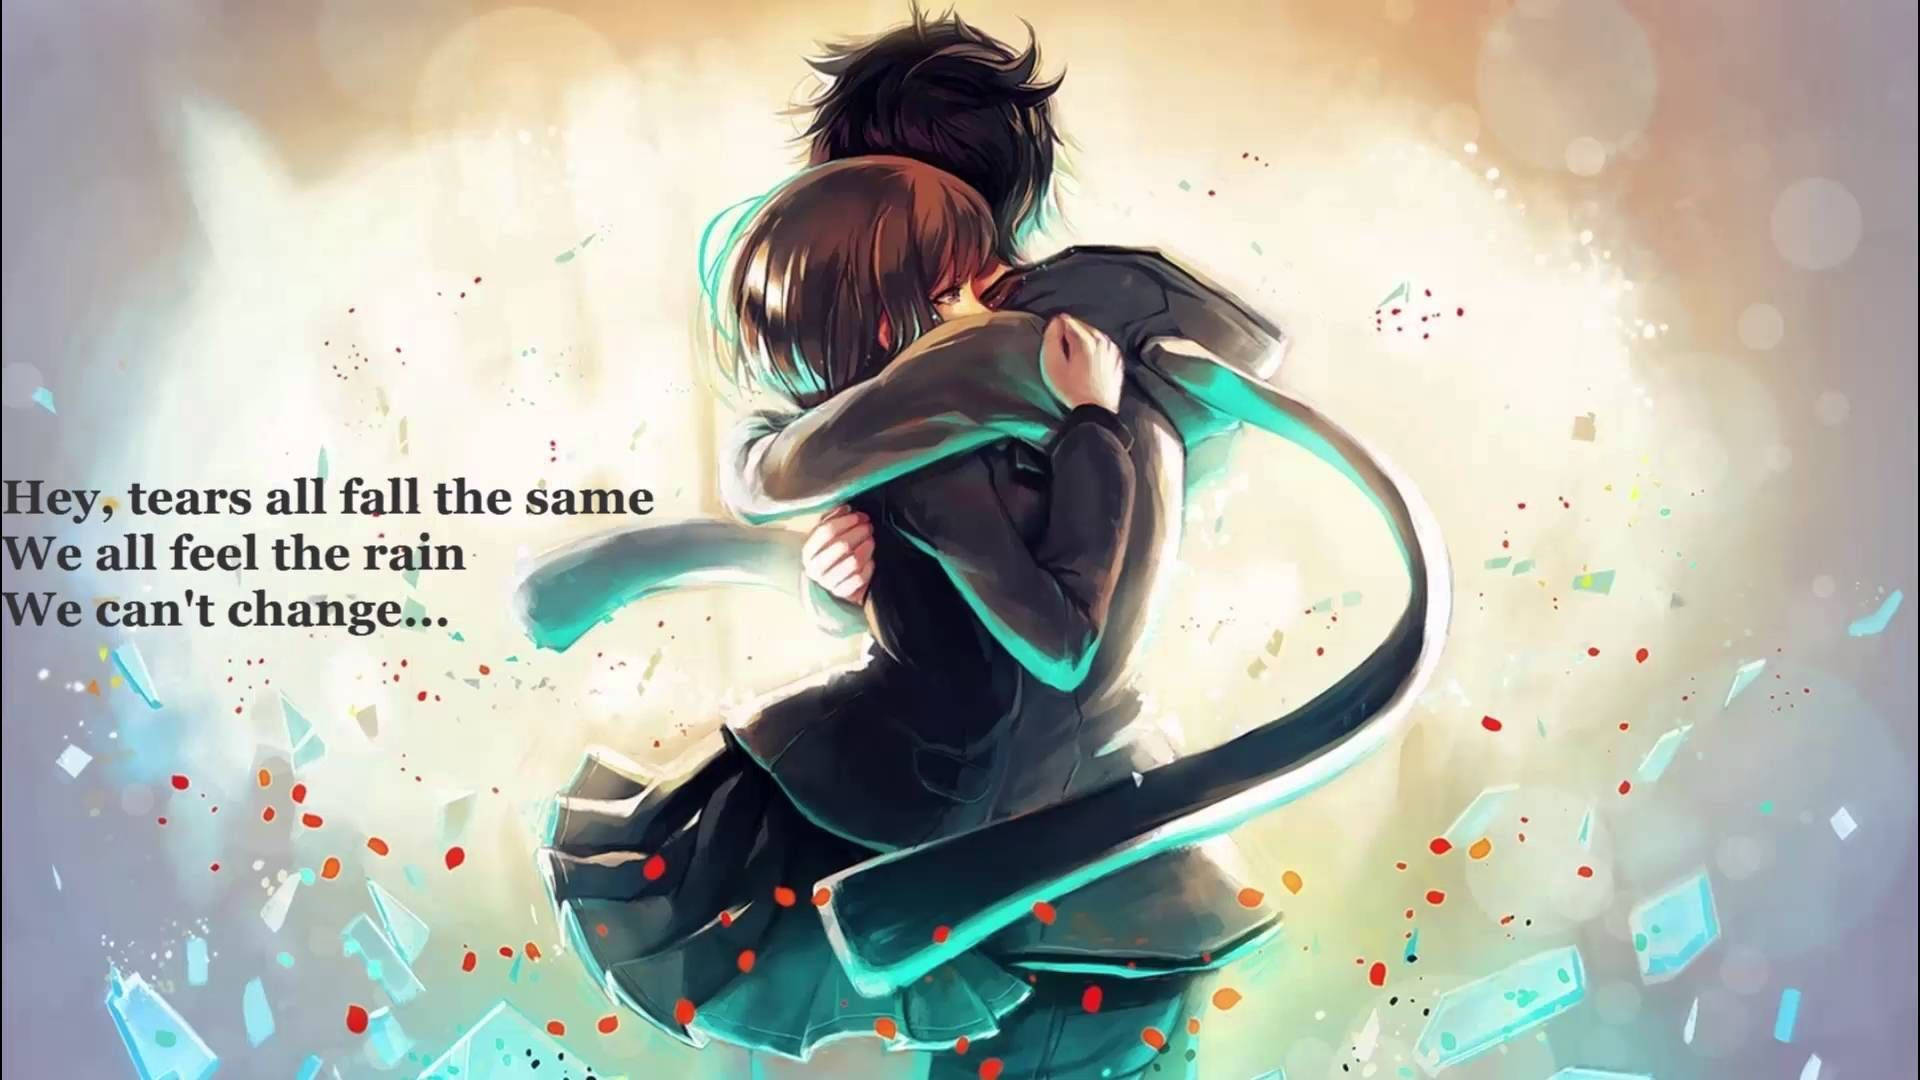 Download Anime Couple Hug With Quote Wallpaper 